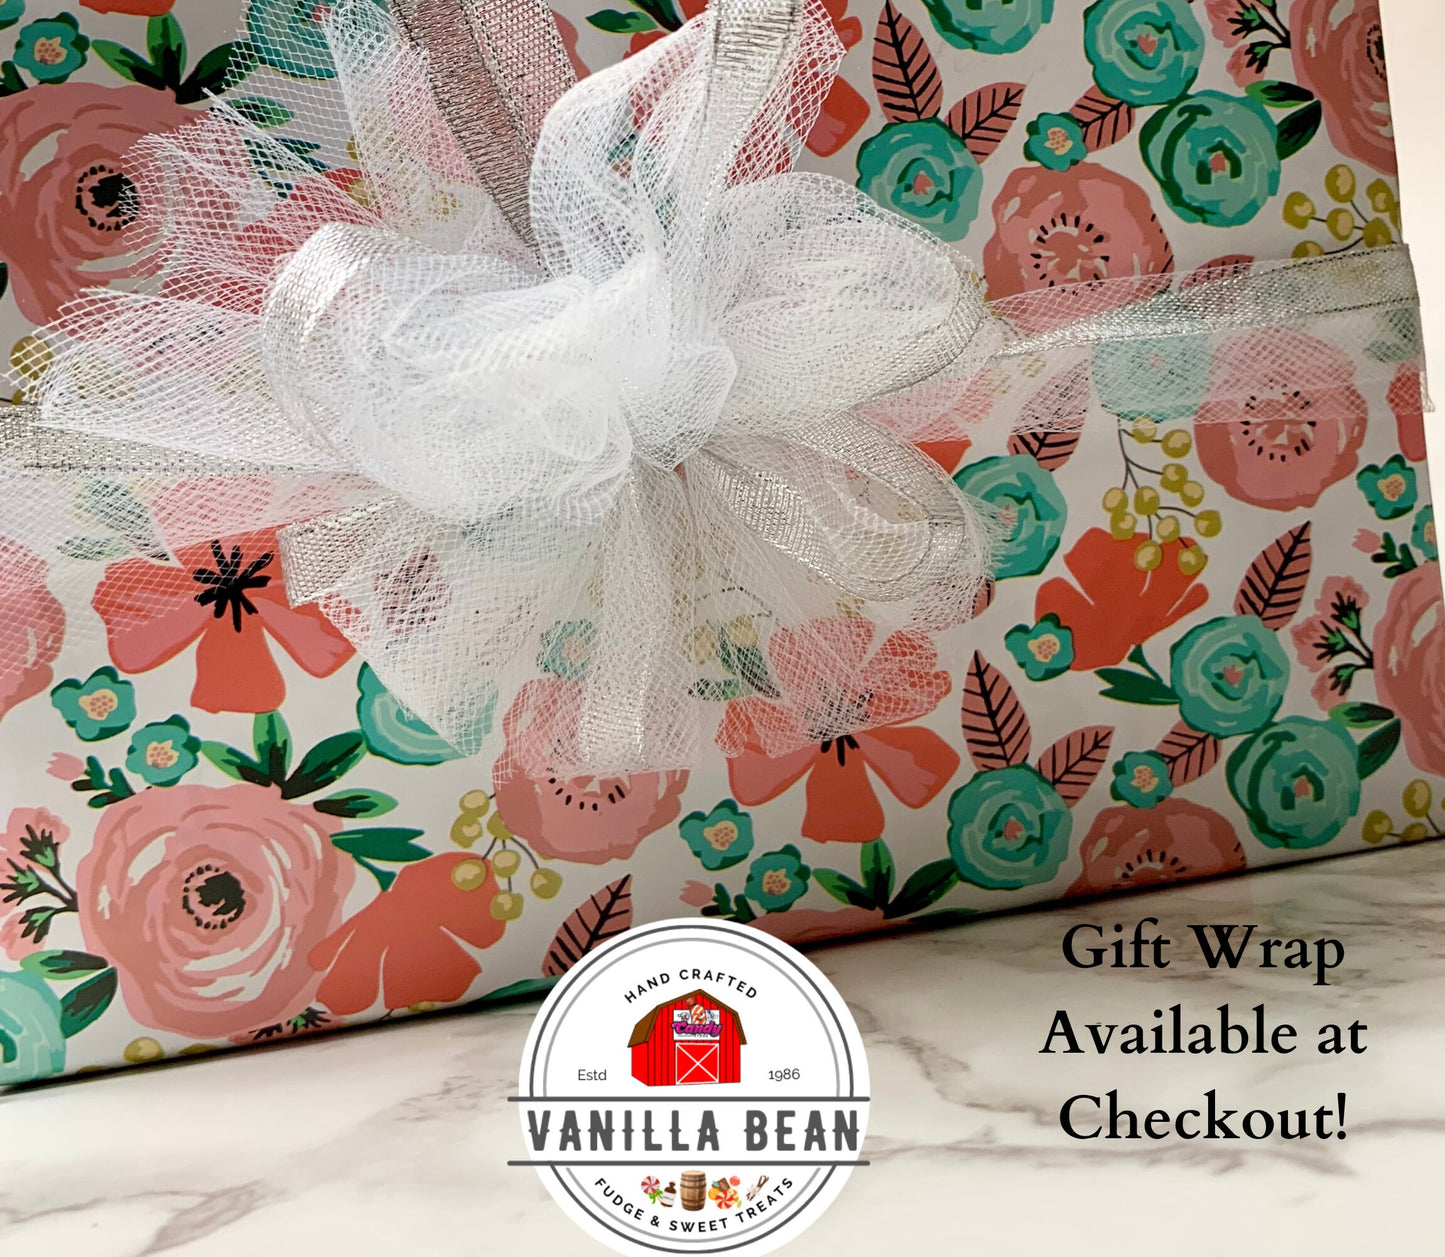 Chocolate Fudge Candy Gift Box Beautifully wrapped with bow, tissue, CHOCOLATE Lovers presents, flavor choices, free shipping